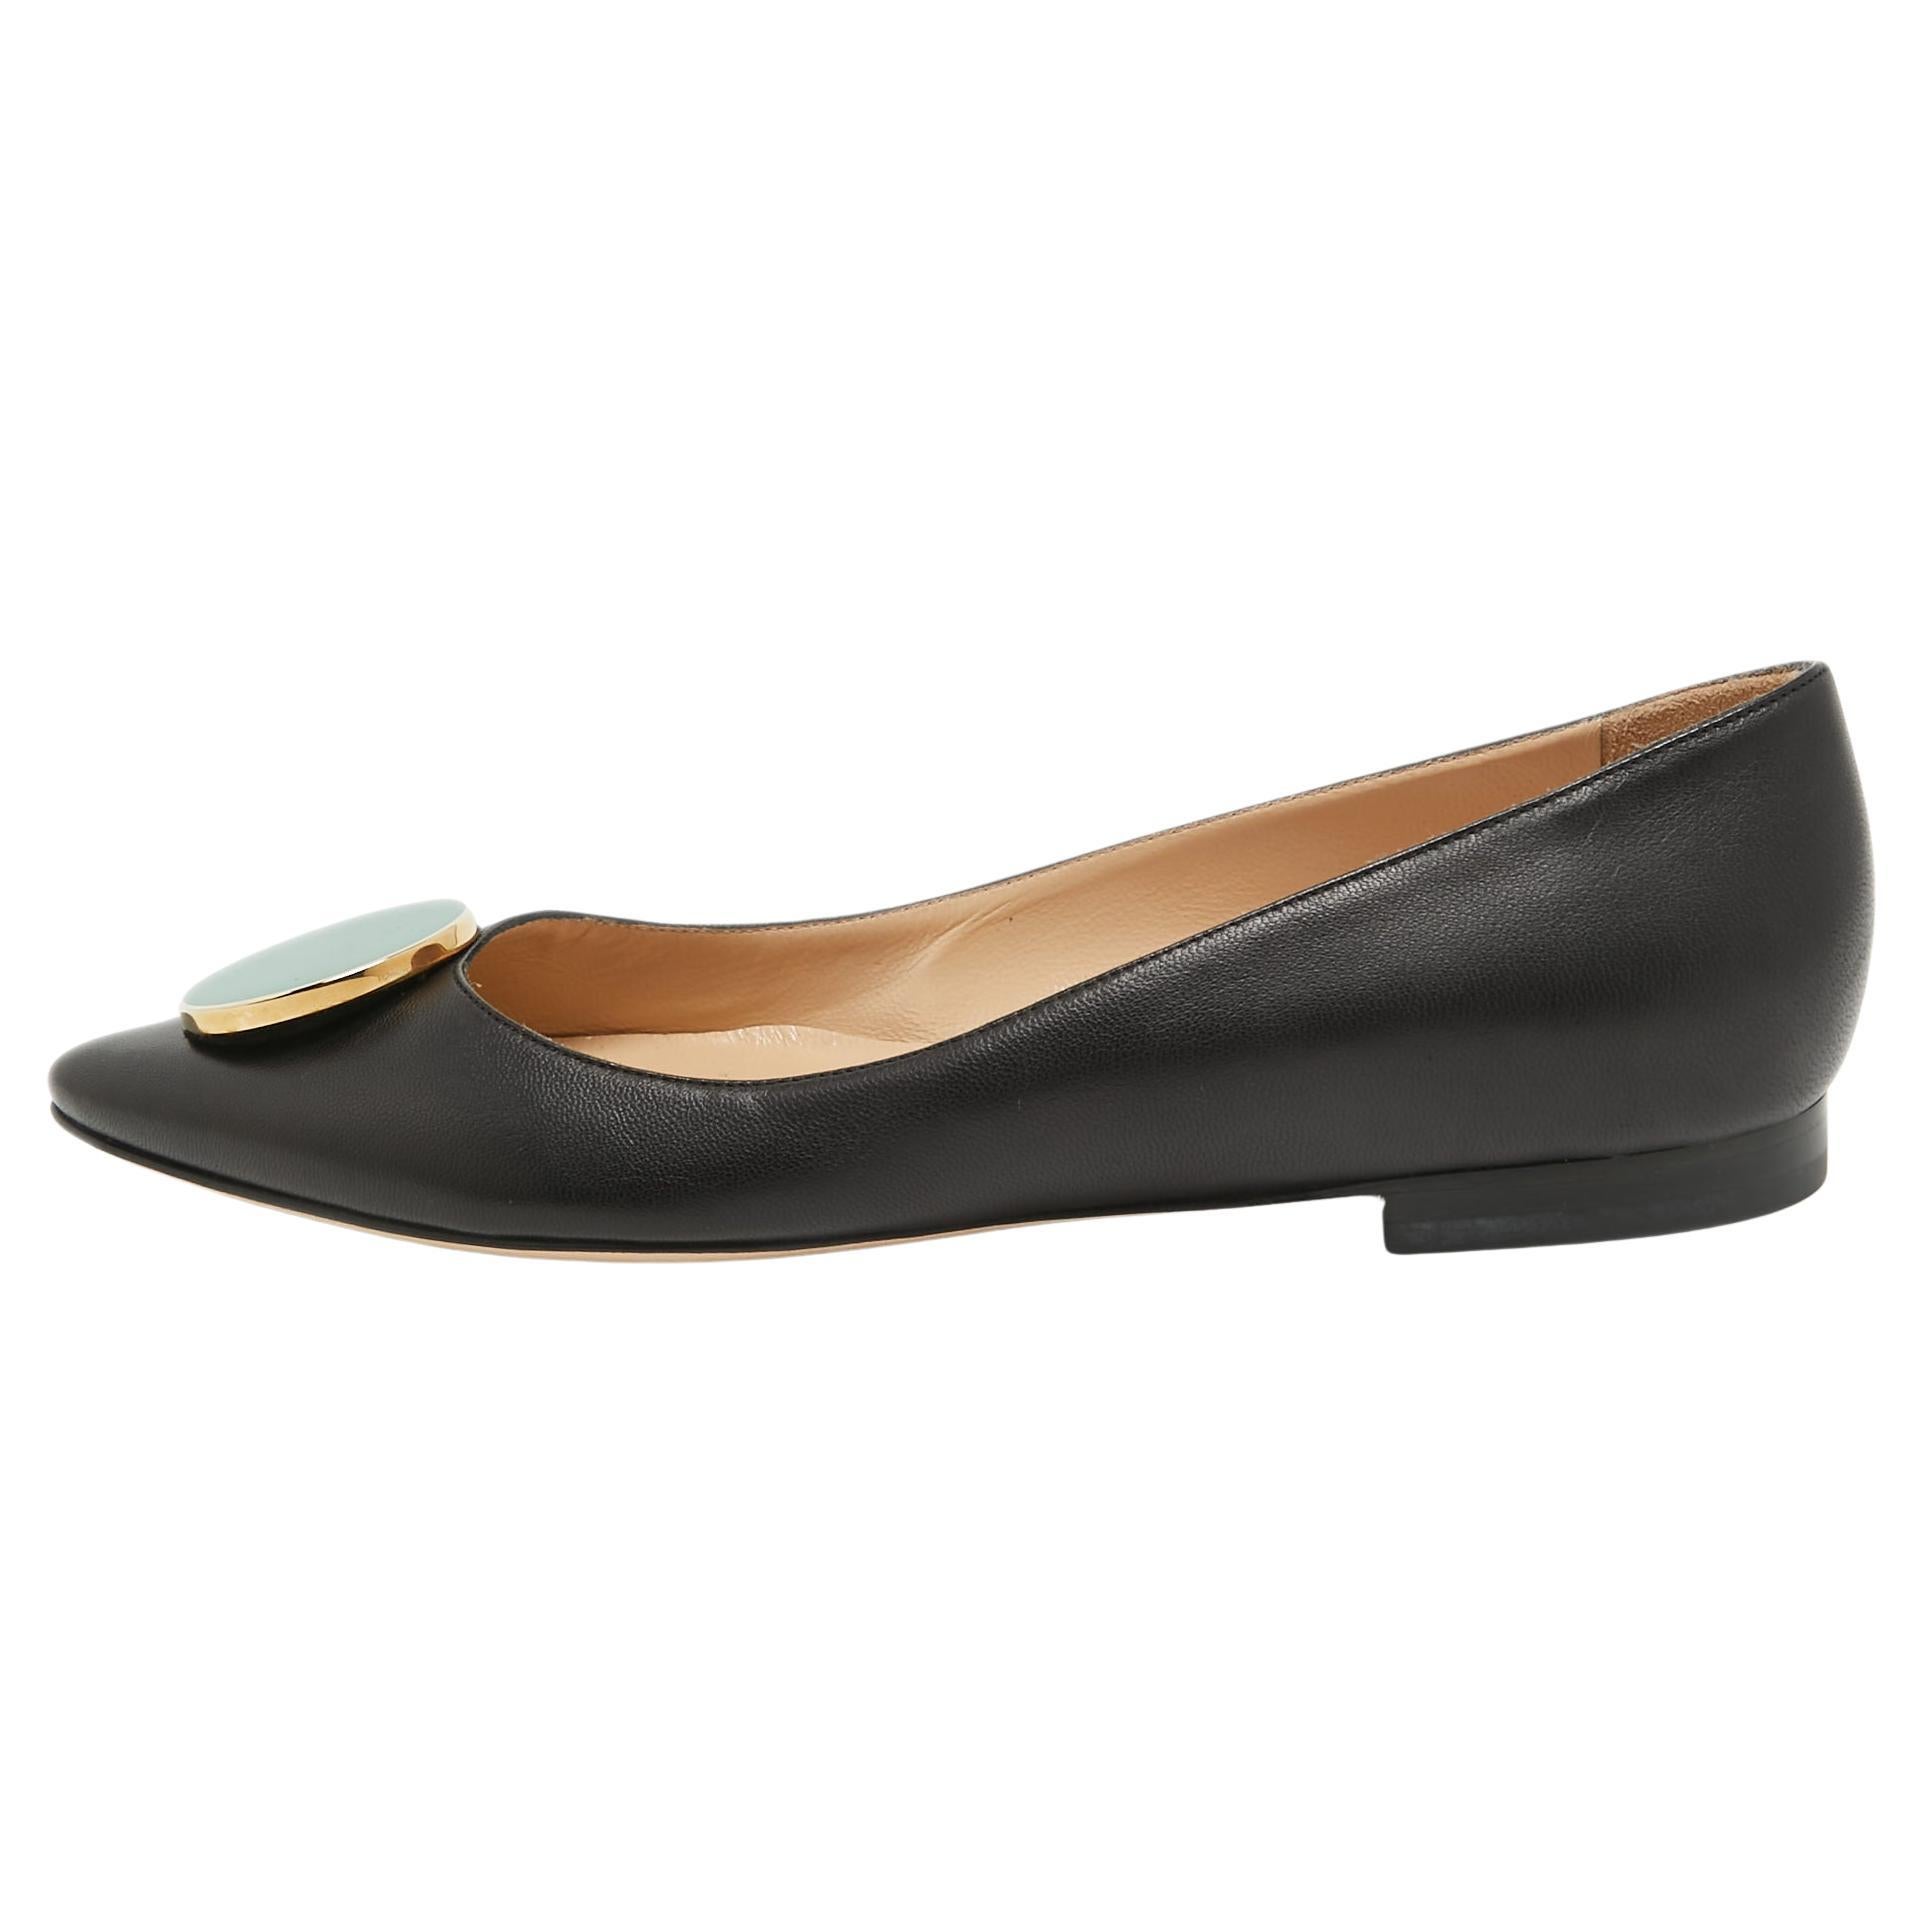 Manolo Blahnik Black Leather Pointed Toe Ballet Flats Size 37 For Sale